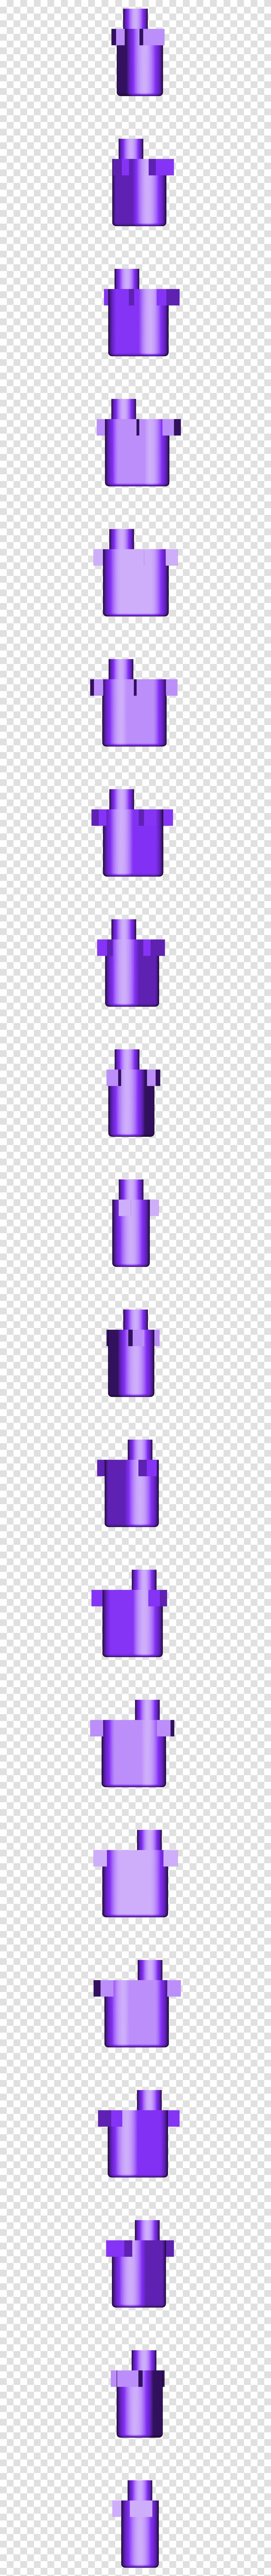 Usb Flash Drive, Lighting, Bottle, Can, Spray Can Transparent Png